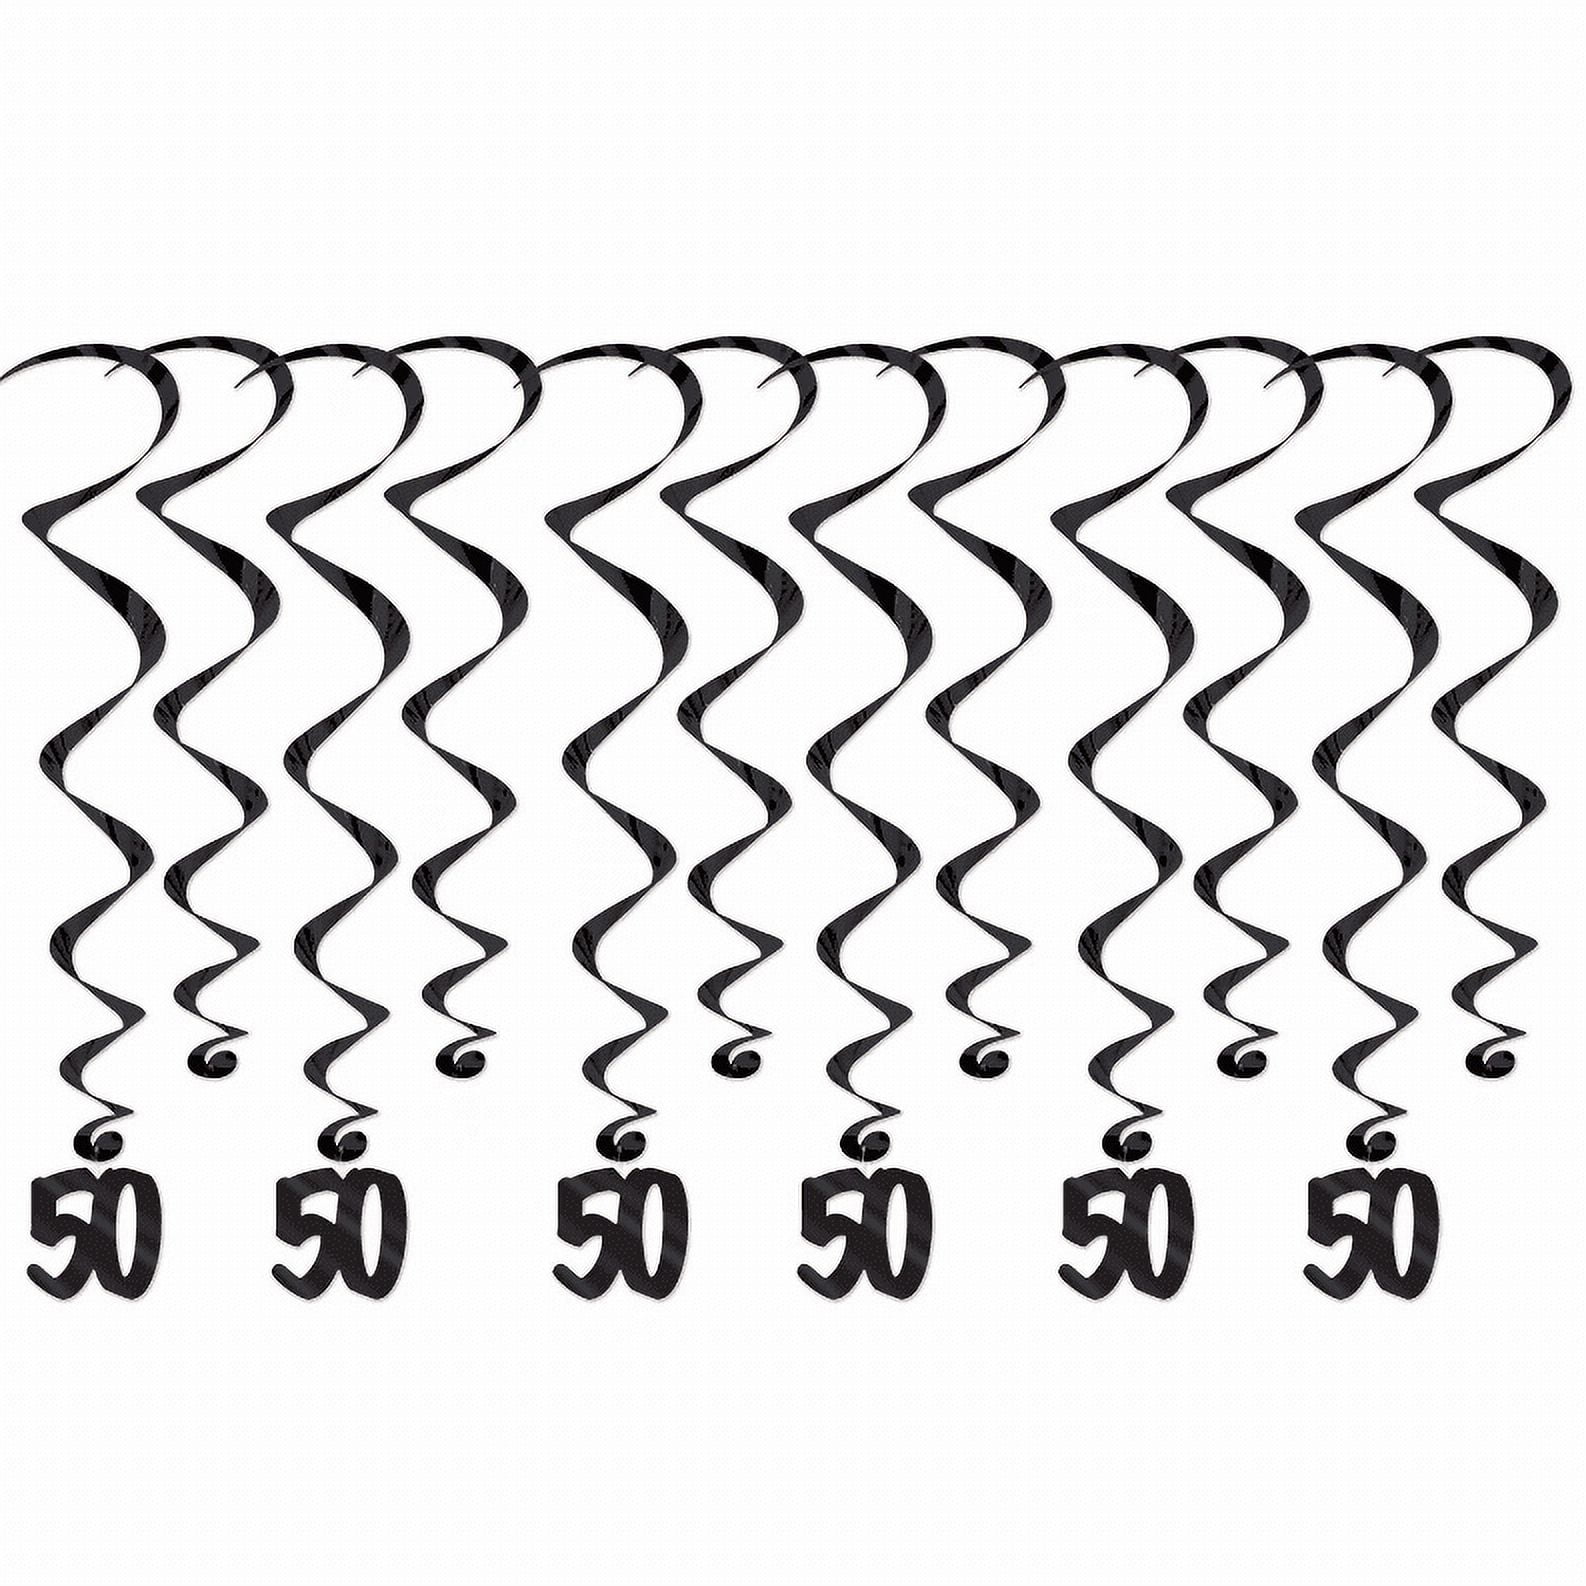 Picture of Beistle 53570-50 17.5 to 32 in. 50 Whirls, Black - Pack of 6